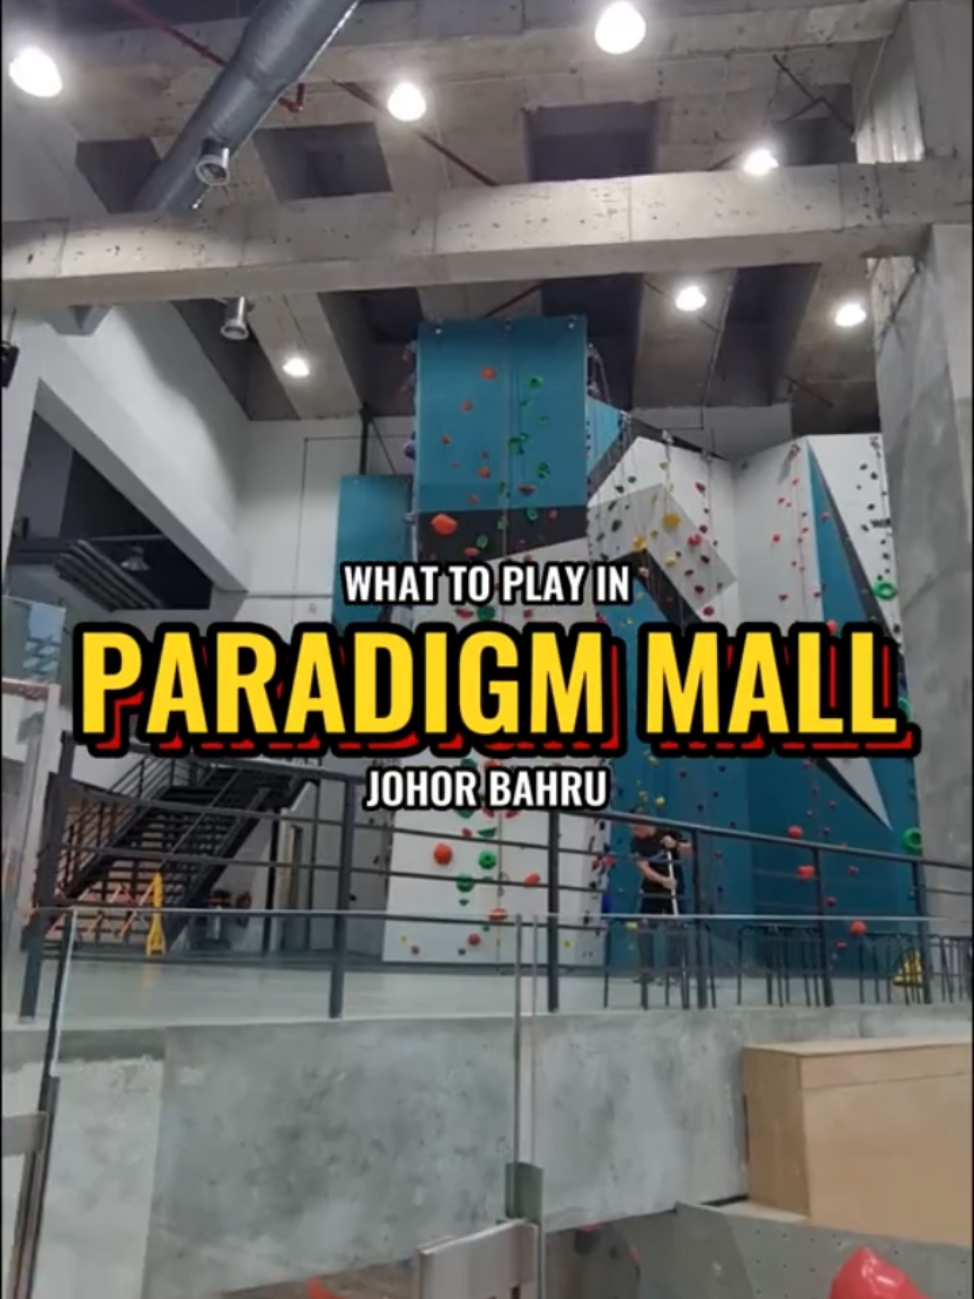 Welcome to Paradigm Mall JB